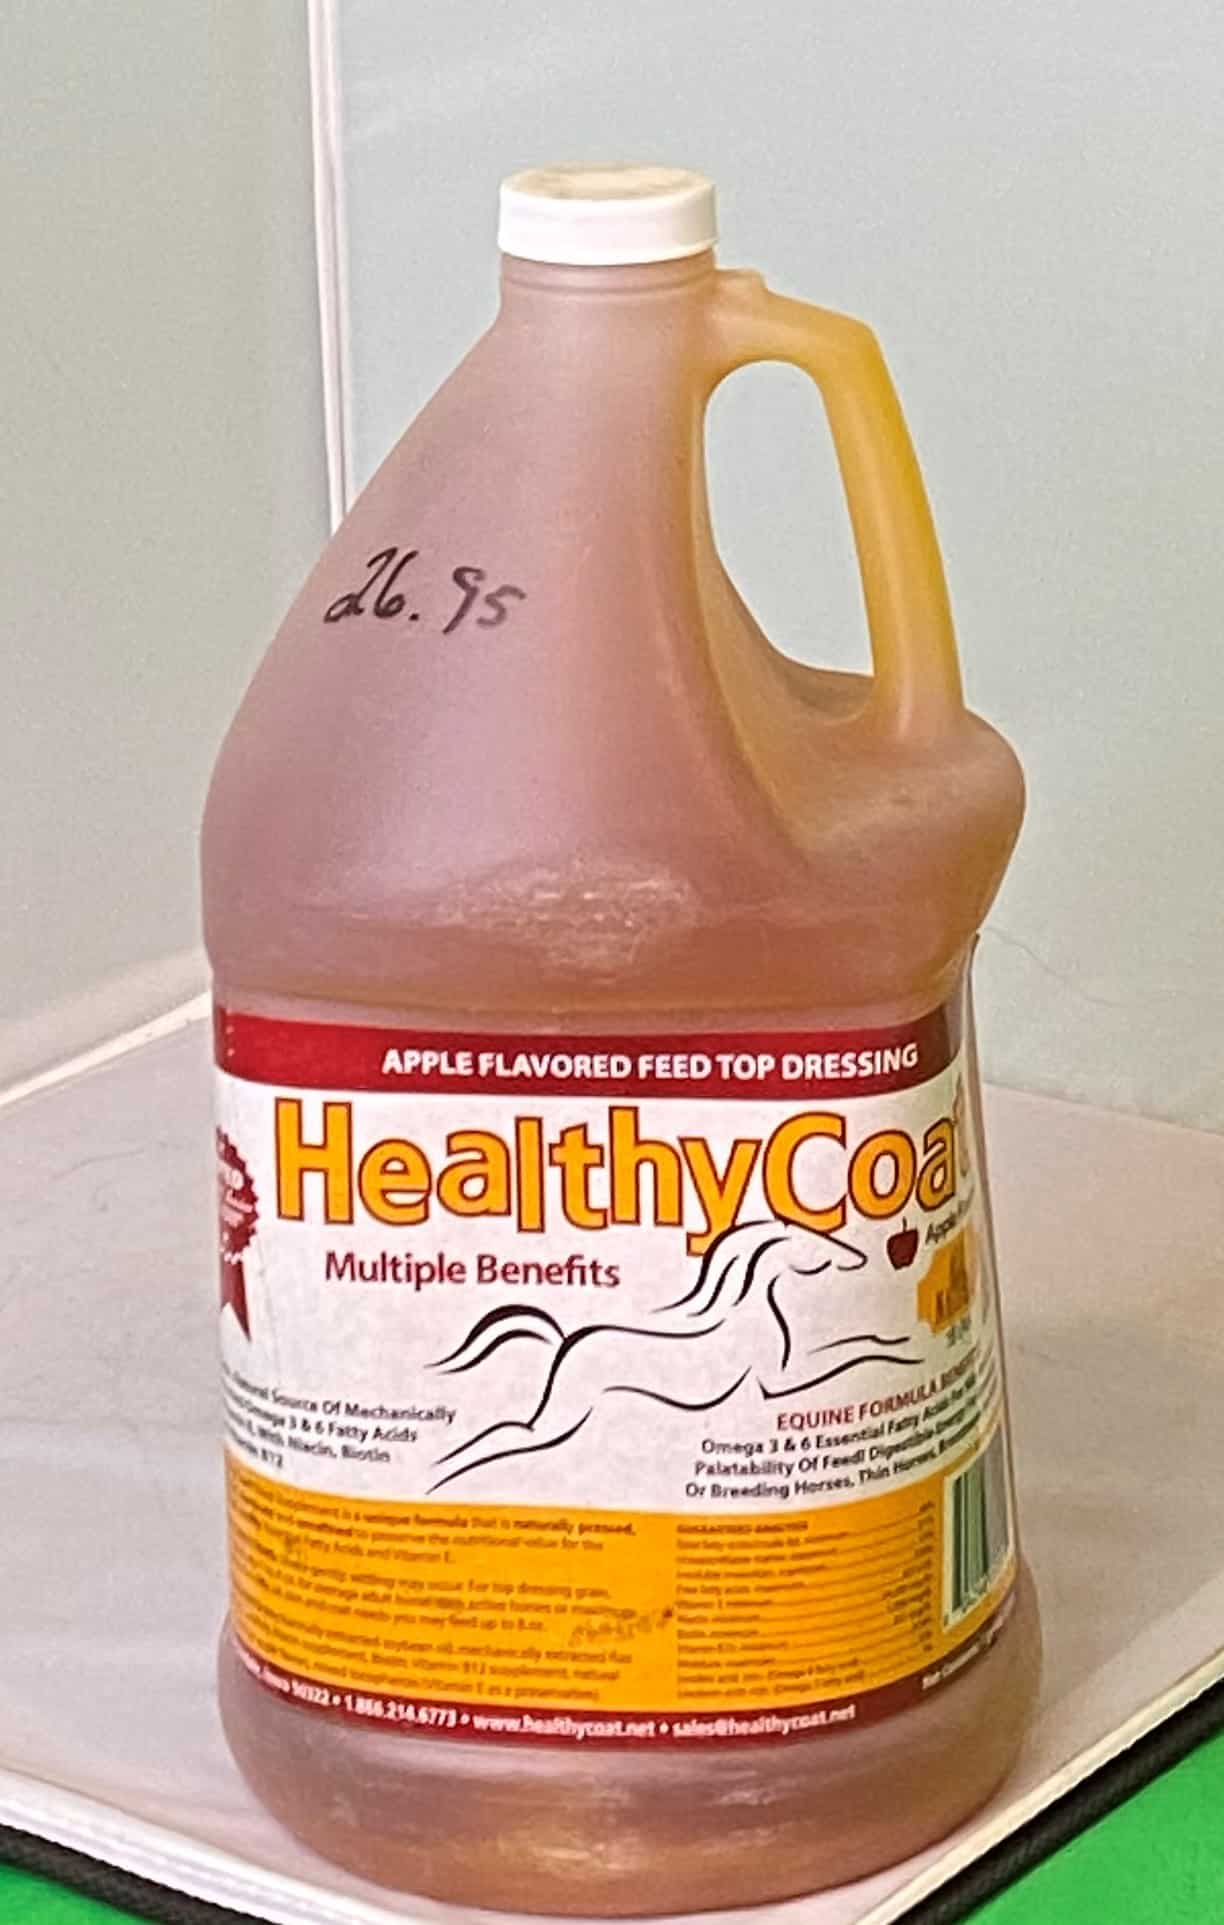 HealthyCoat Feed Top Dressing-1 Gallon